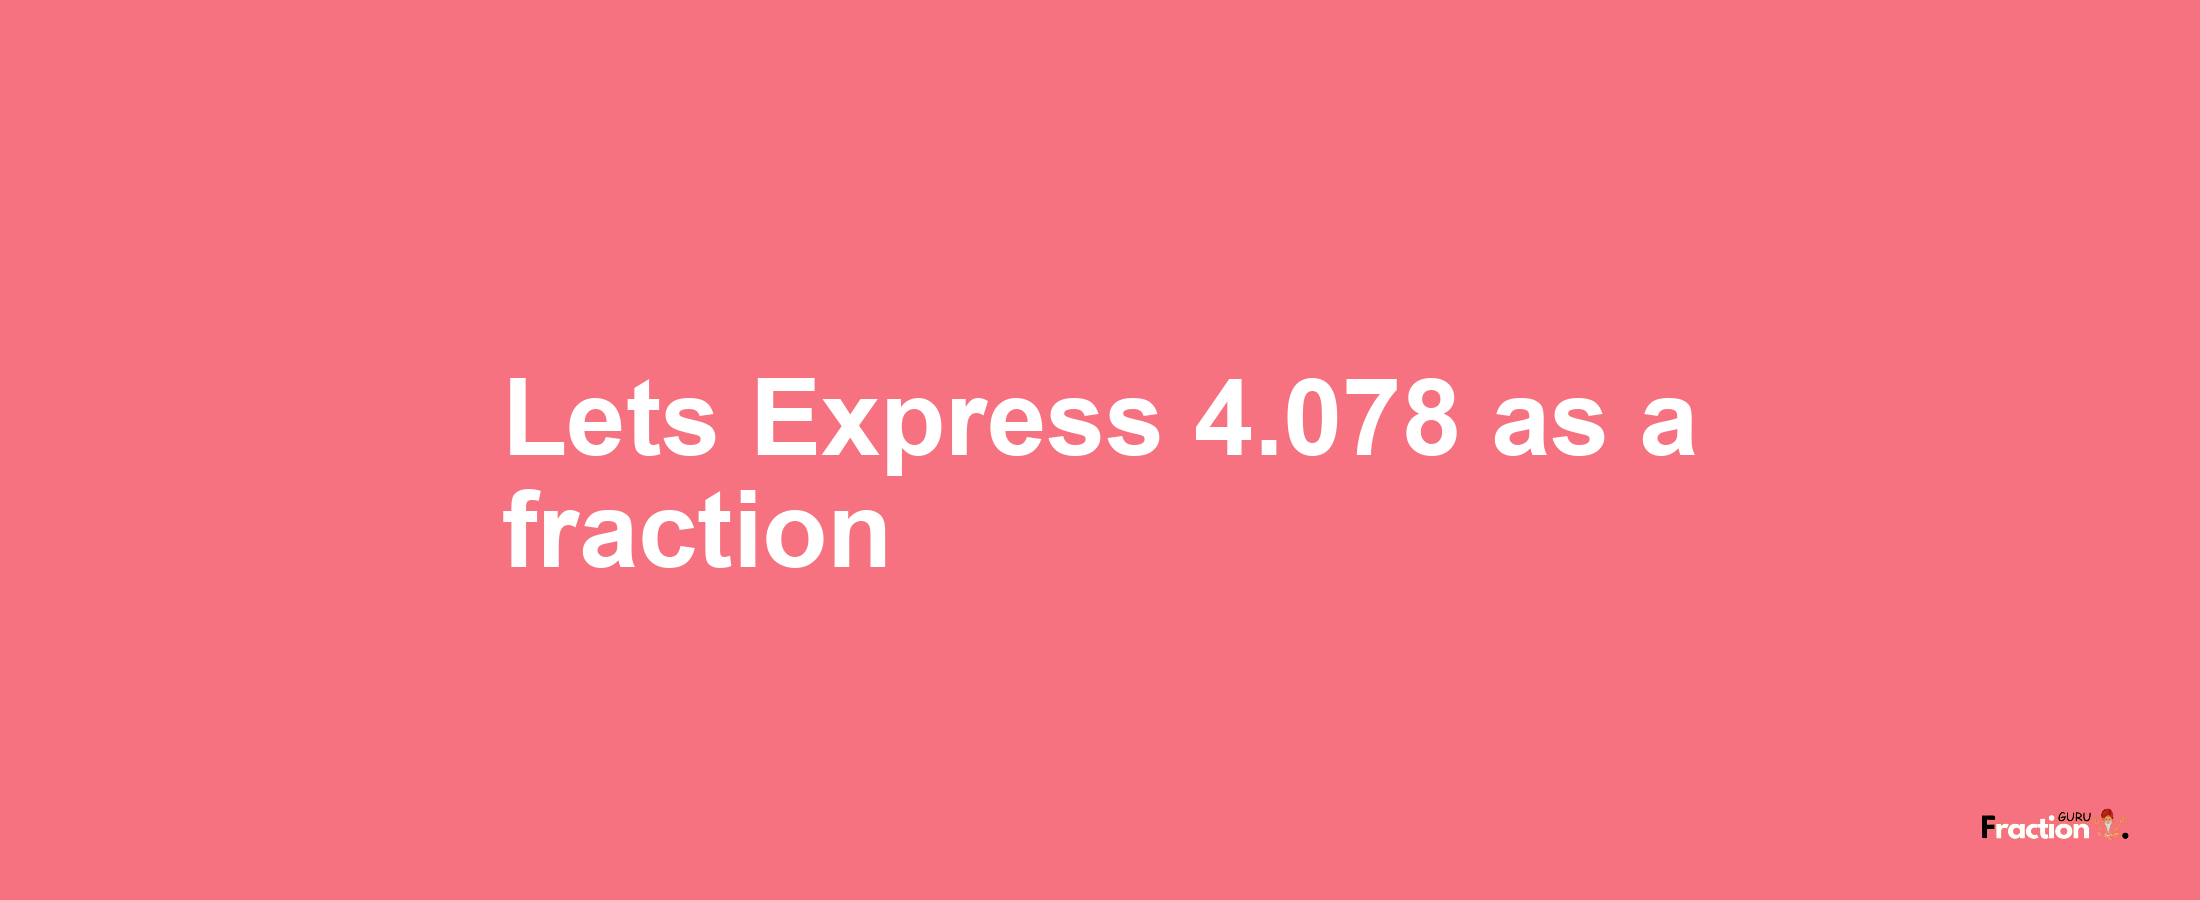 Lets Express 4.078 as afraction